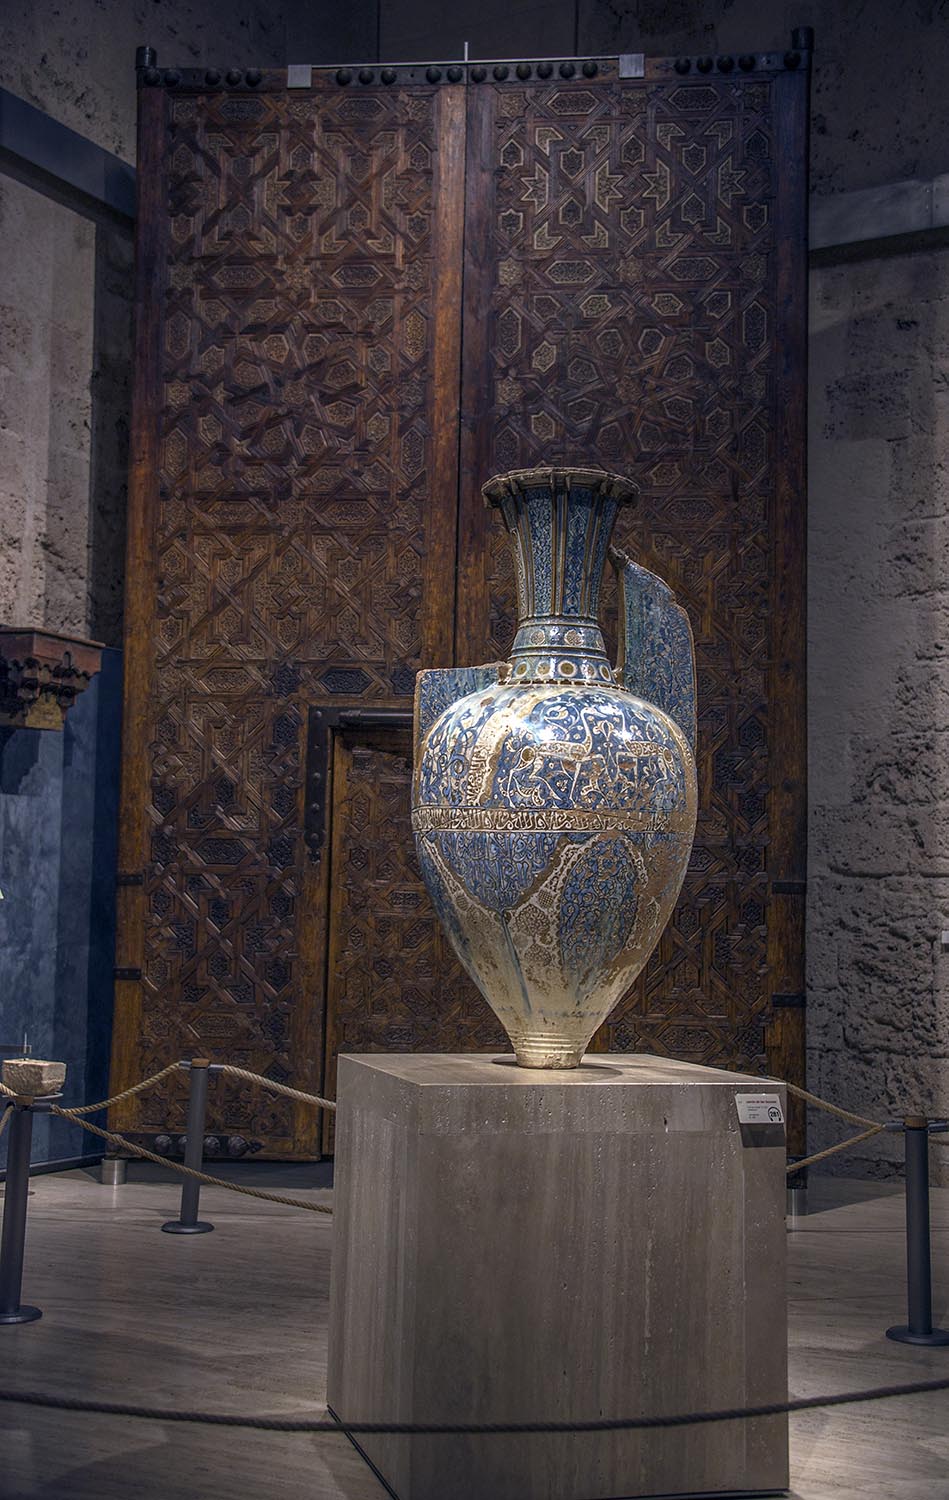 View of the Gazelle Vase in the Alhambra Museum